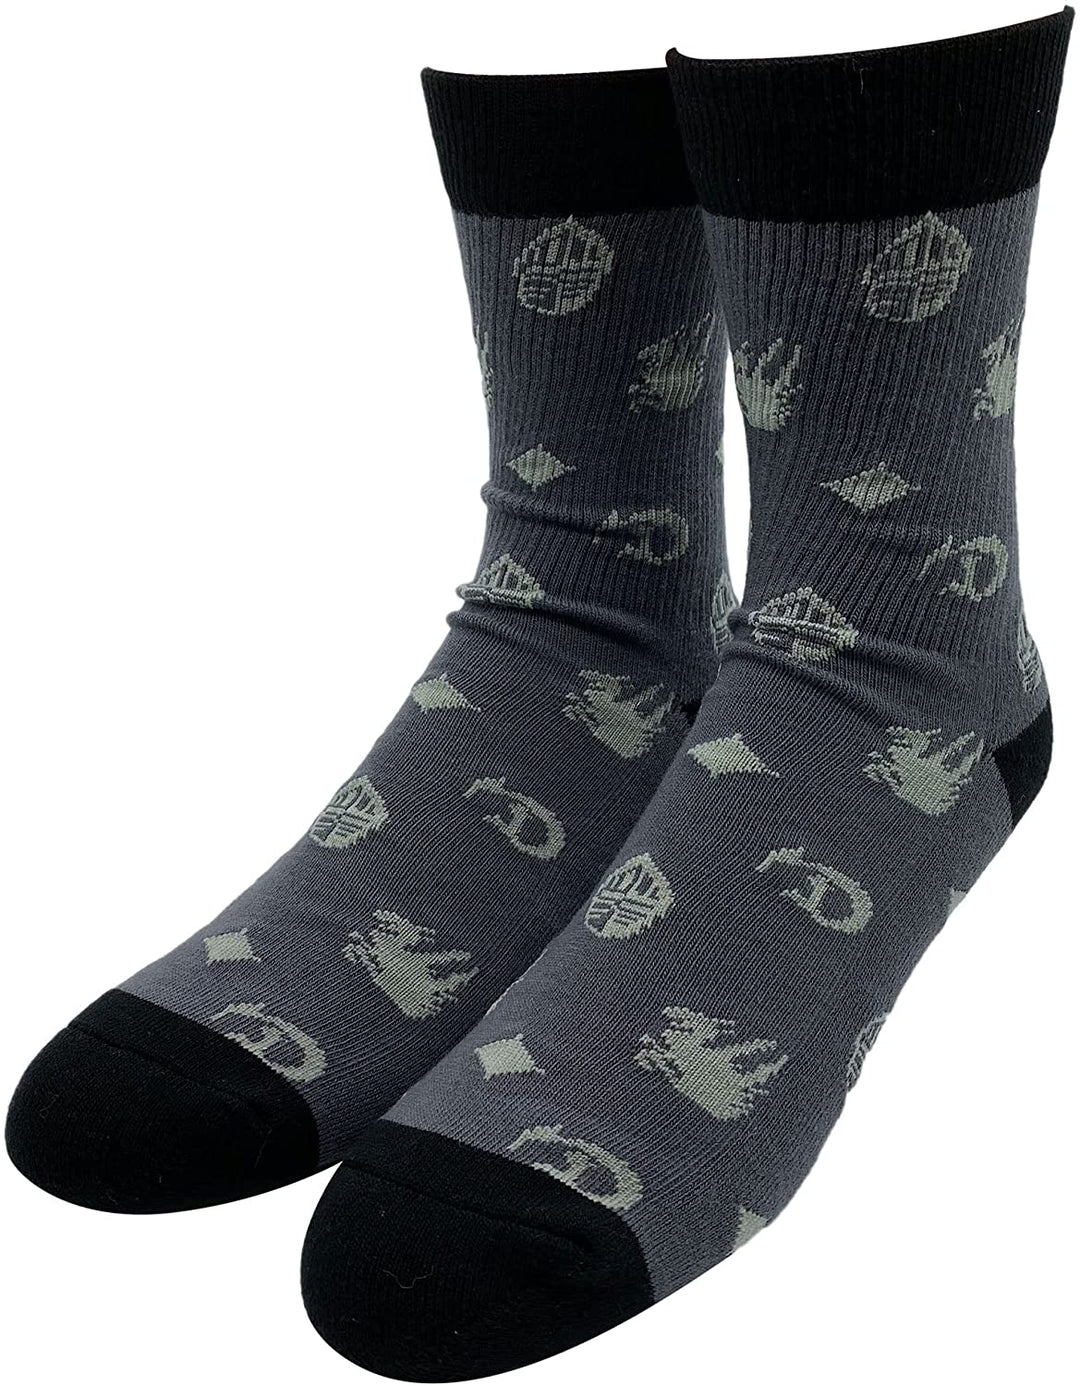 JINX Demon's Souls Icon Toss Embroidered Athletic Crew Socks, 1 Pair